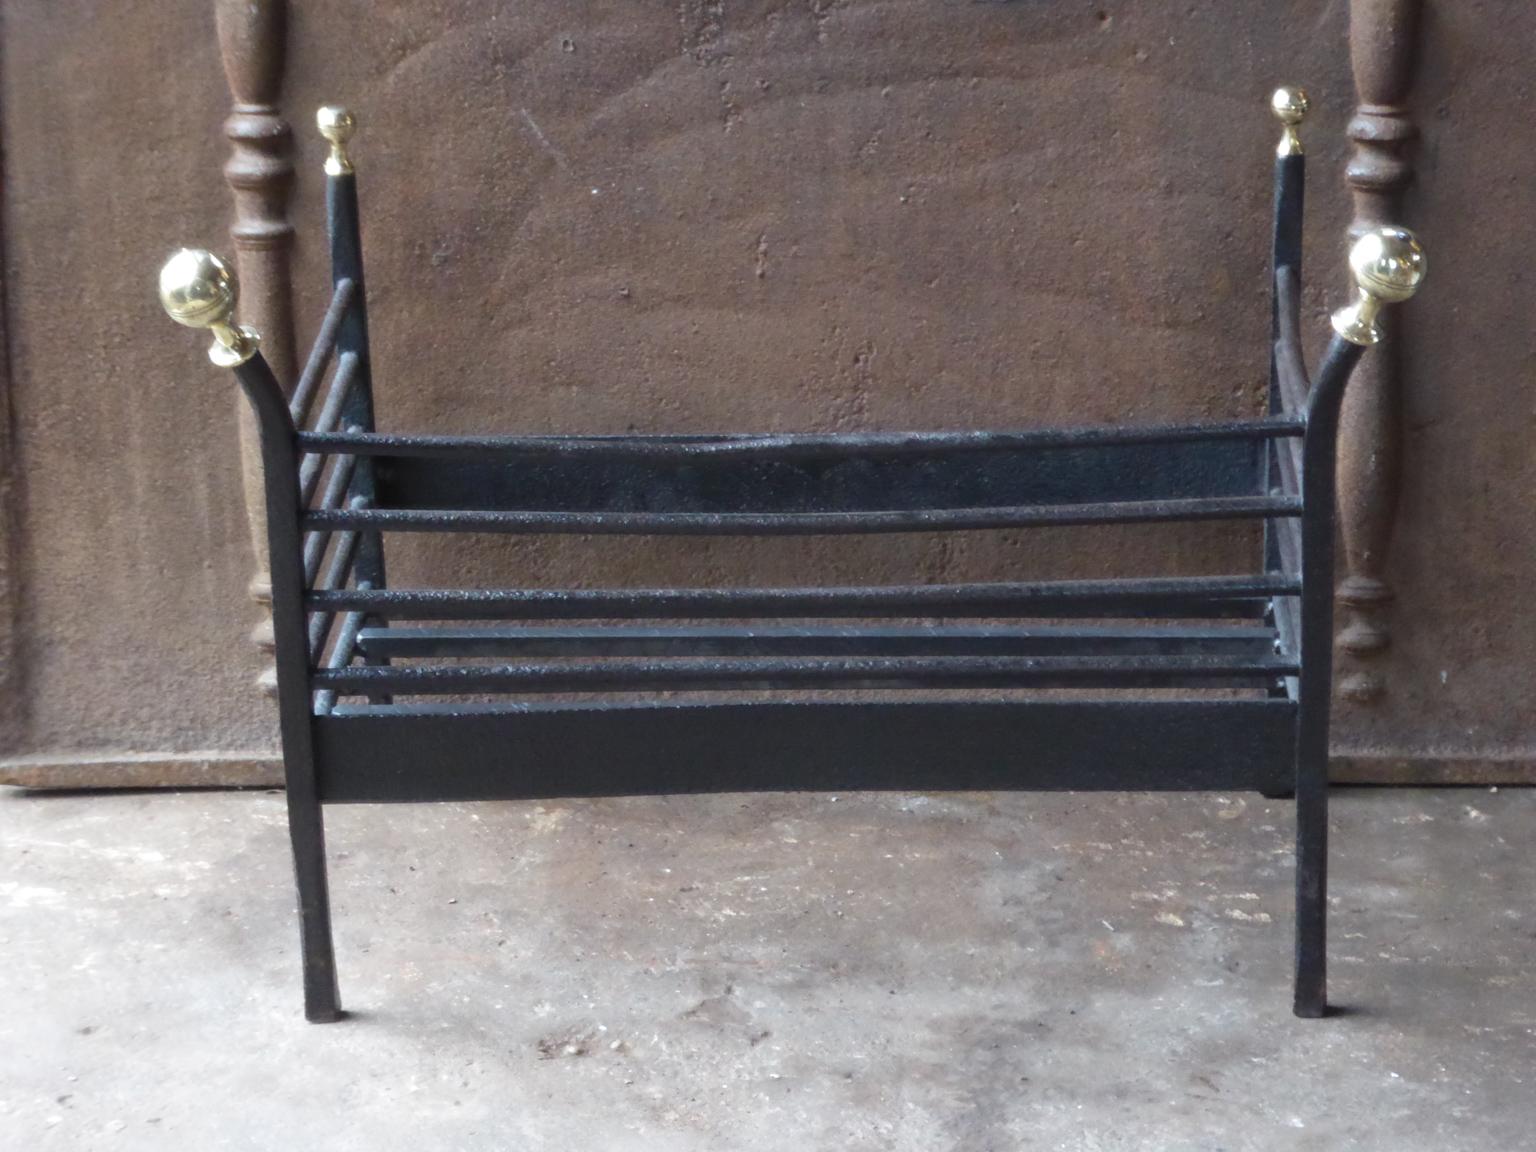 19th century Dutch Victorian fireplace grate made of wrought iron and polished brass. The fireplace grate is in a good condition and is fully functional. The total width of the front of the grate is 74 cm (29.1 inch).